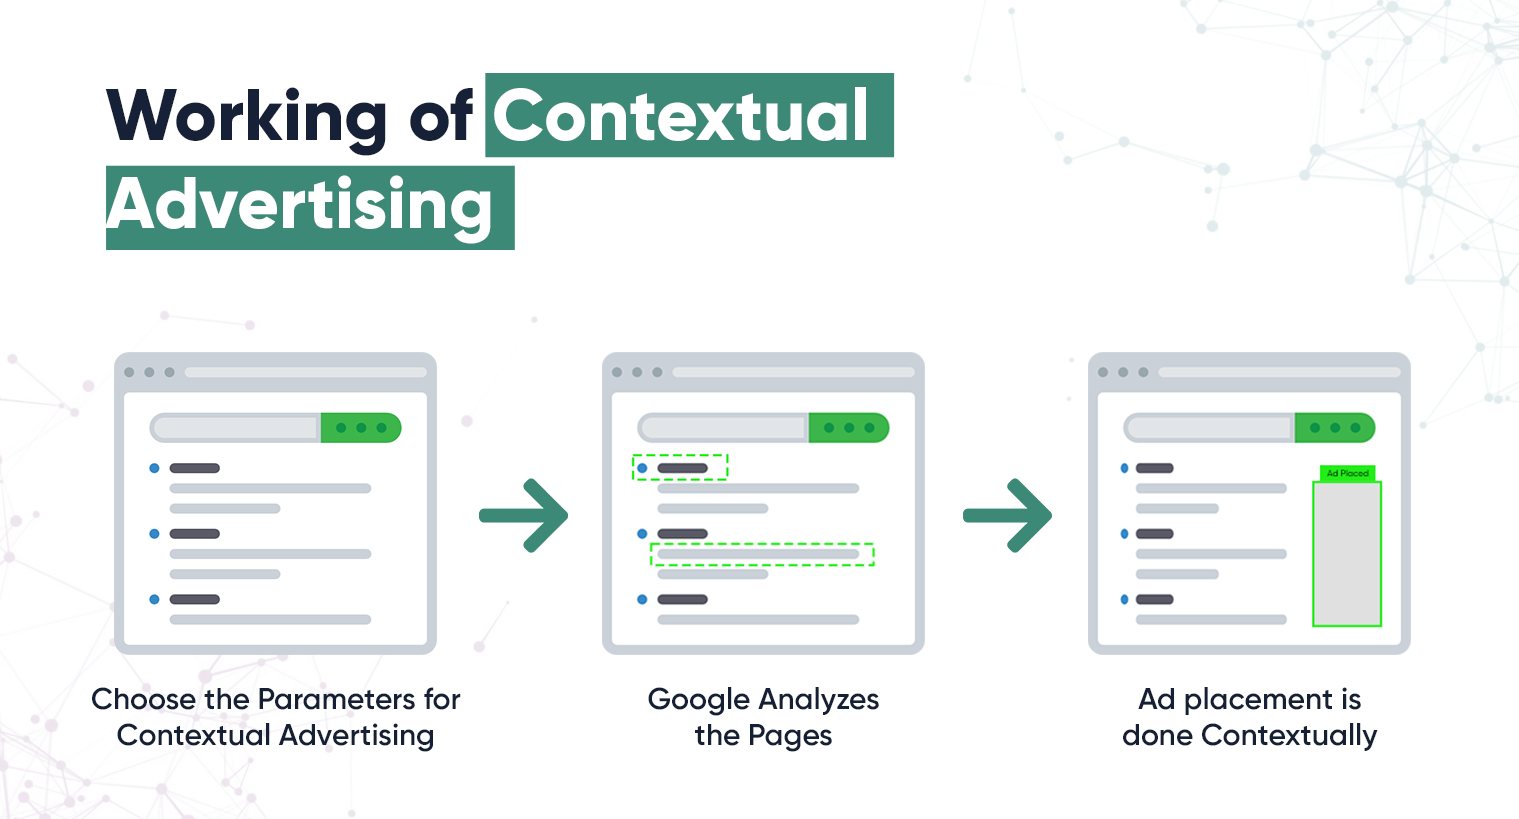 How does Contextual Advertising Work